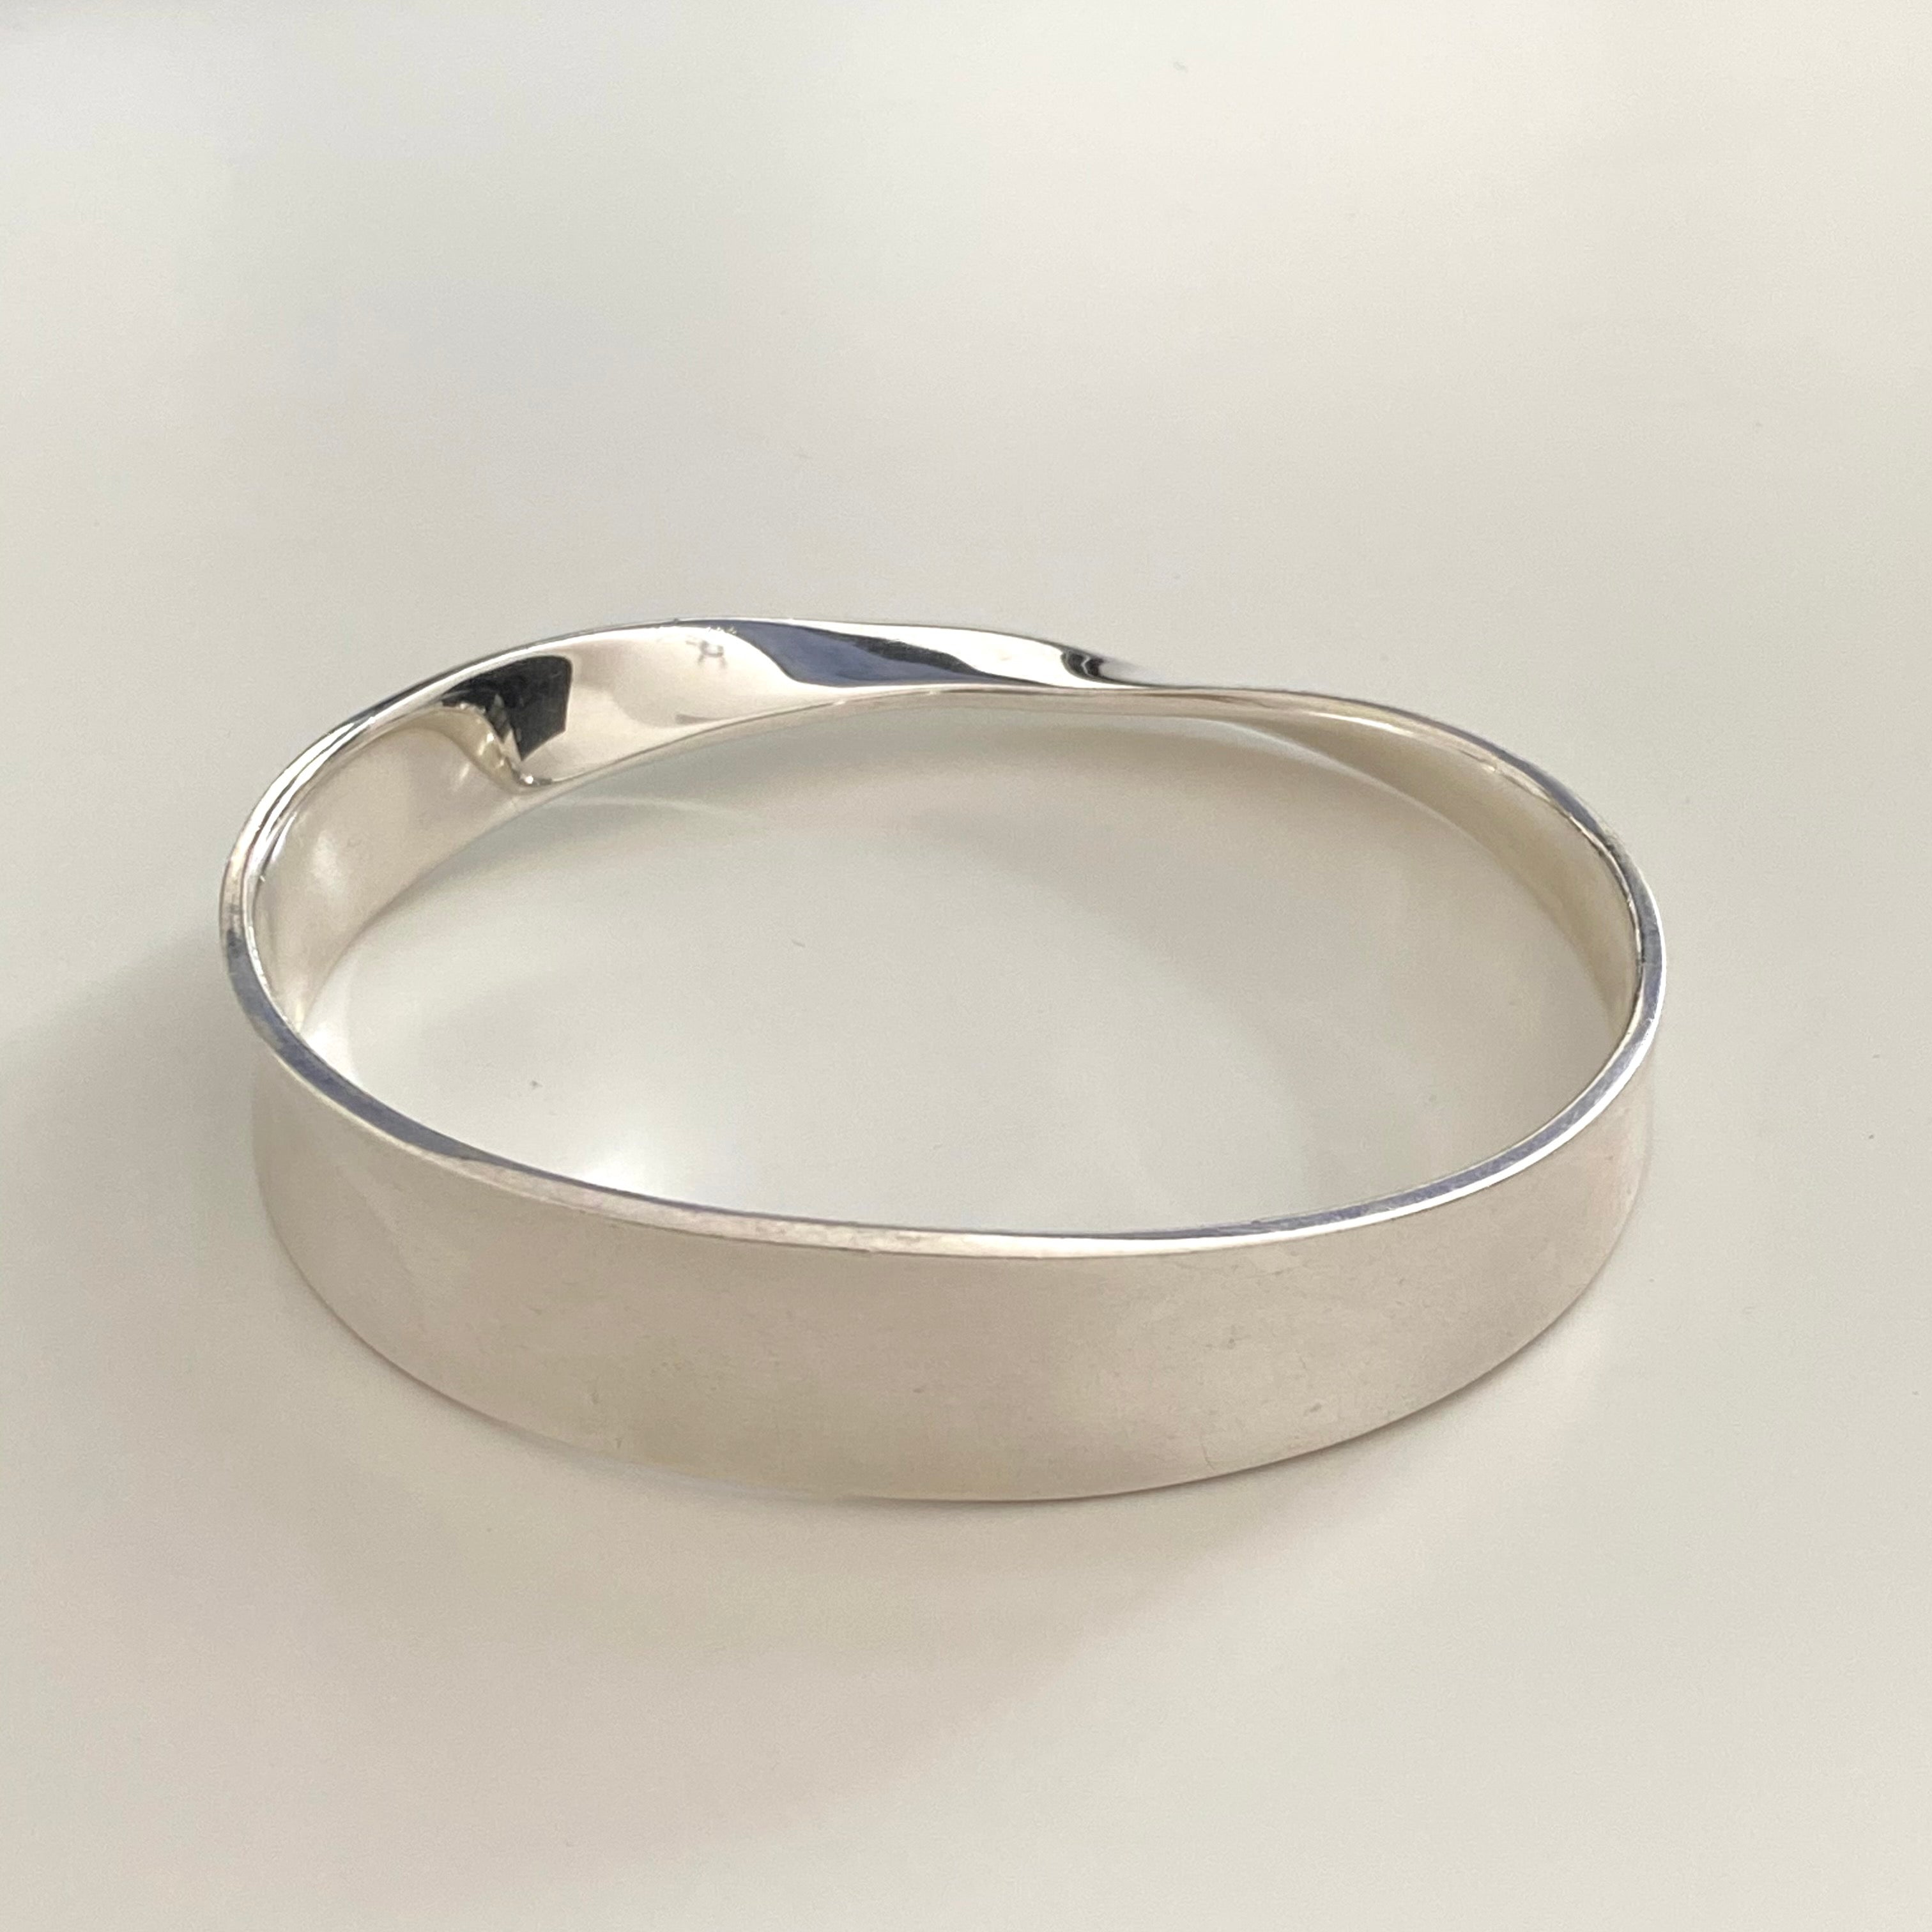 Heavy Sterling Silver Bangle With a Twist